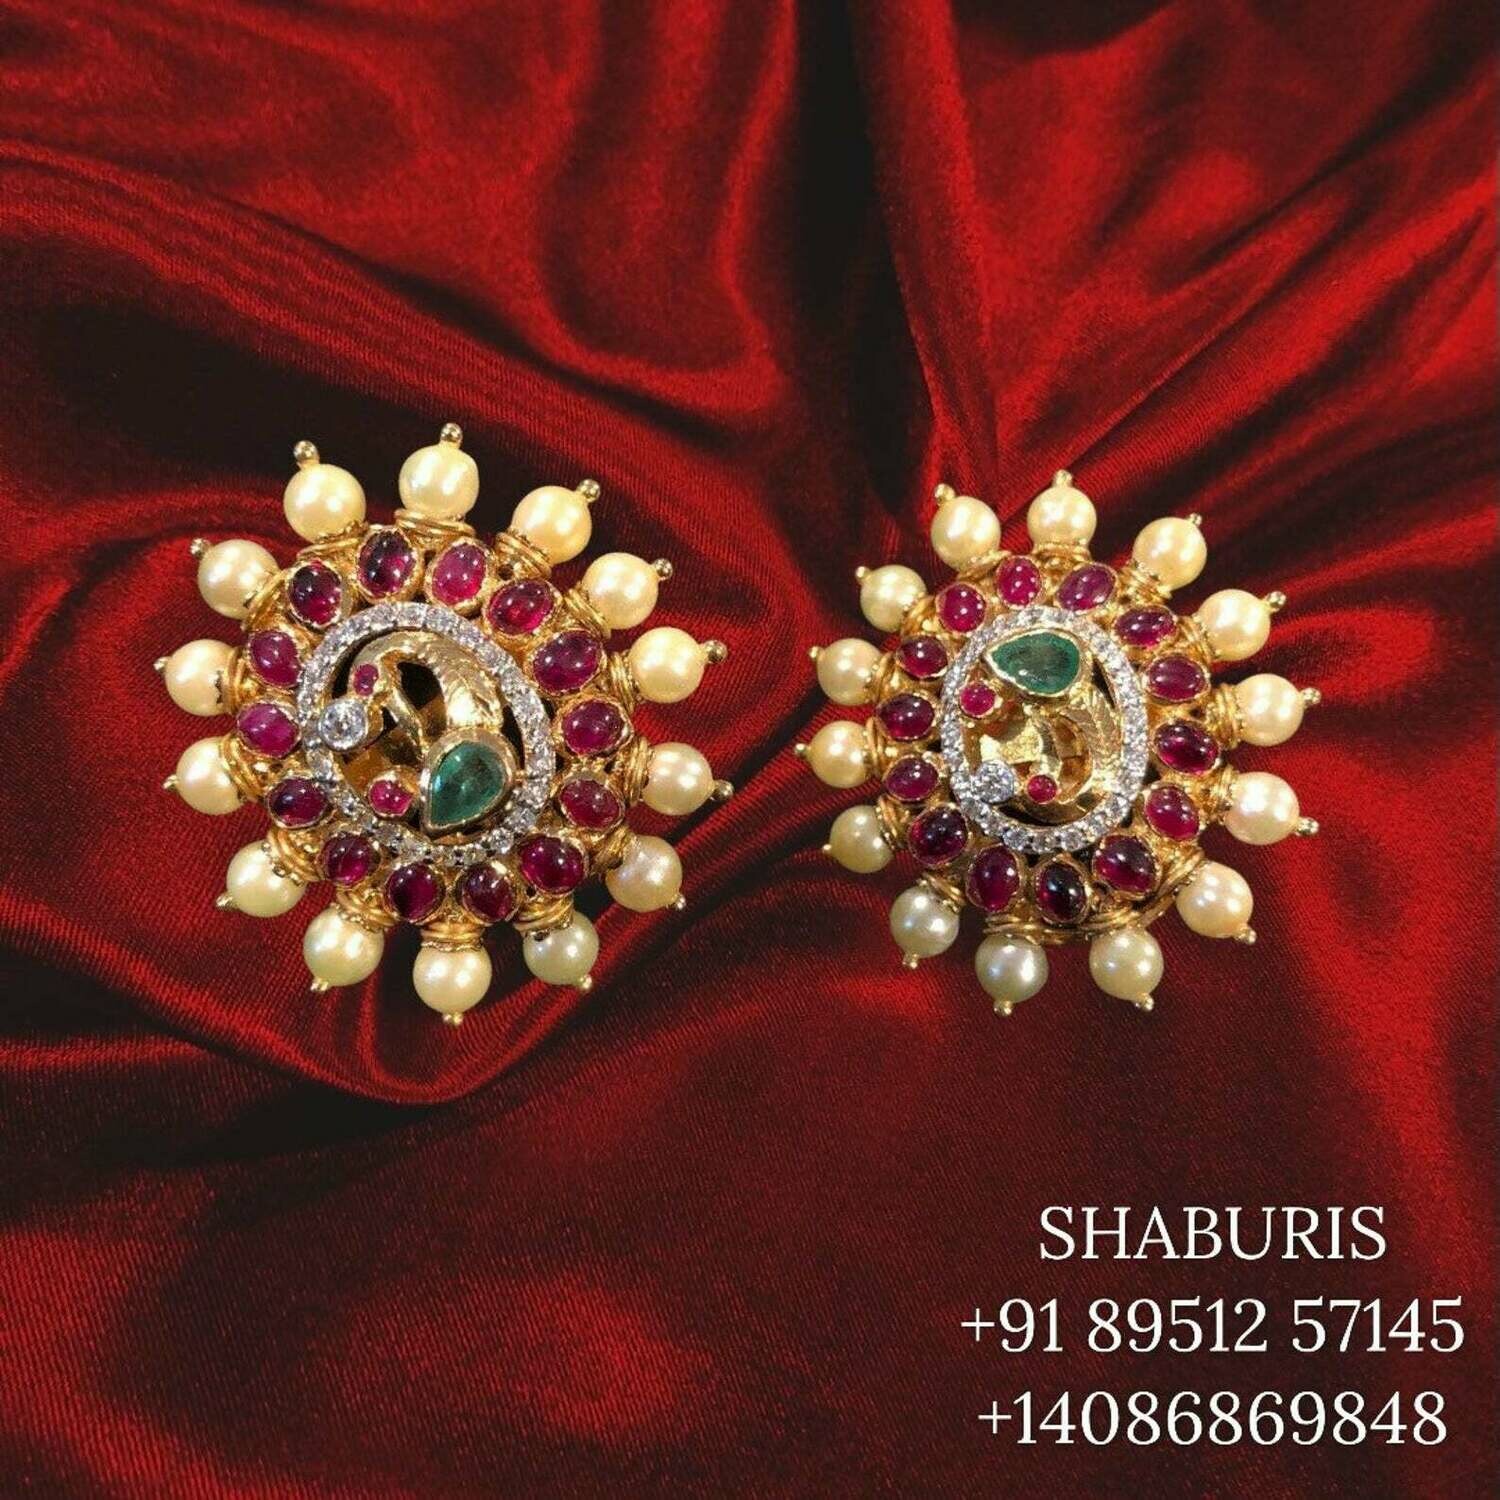 Latest Indian Jewelry,Pure Silver Jewellery Indian ,studs, indian earrings,lyte weight Indian Bridal,Indian Wedding Jewelry-NIHIRA-SHABURIS